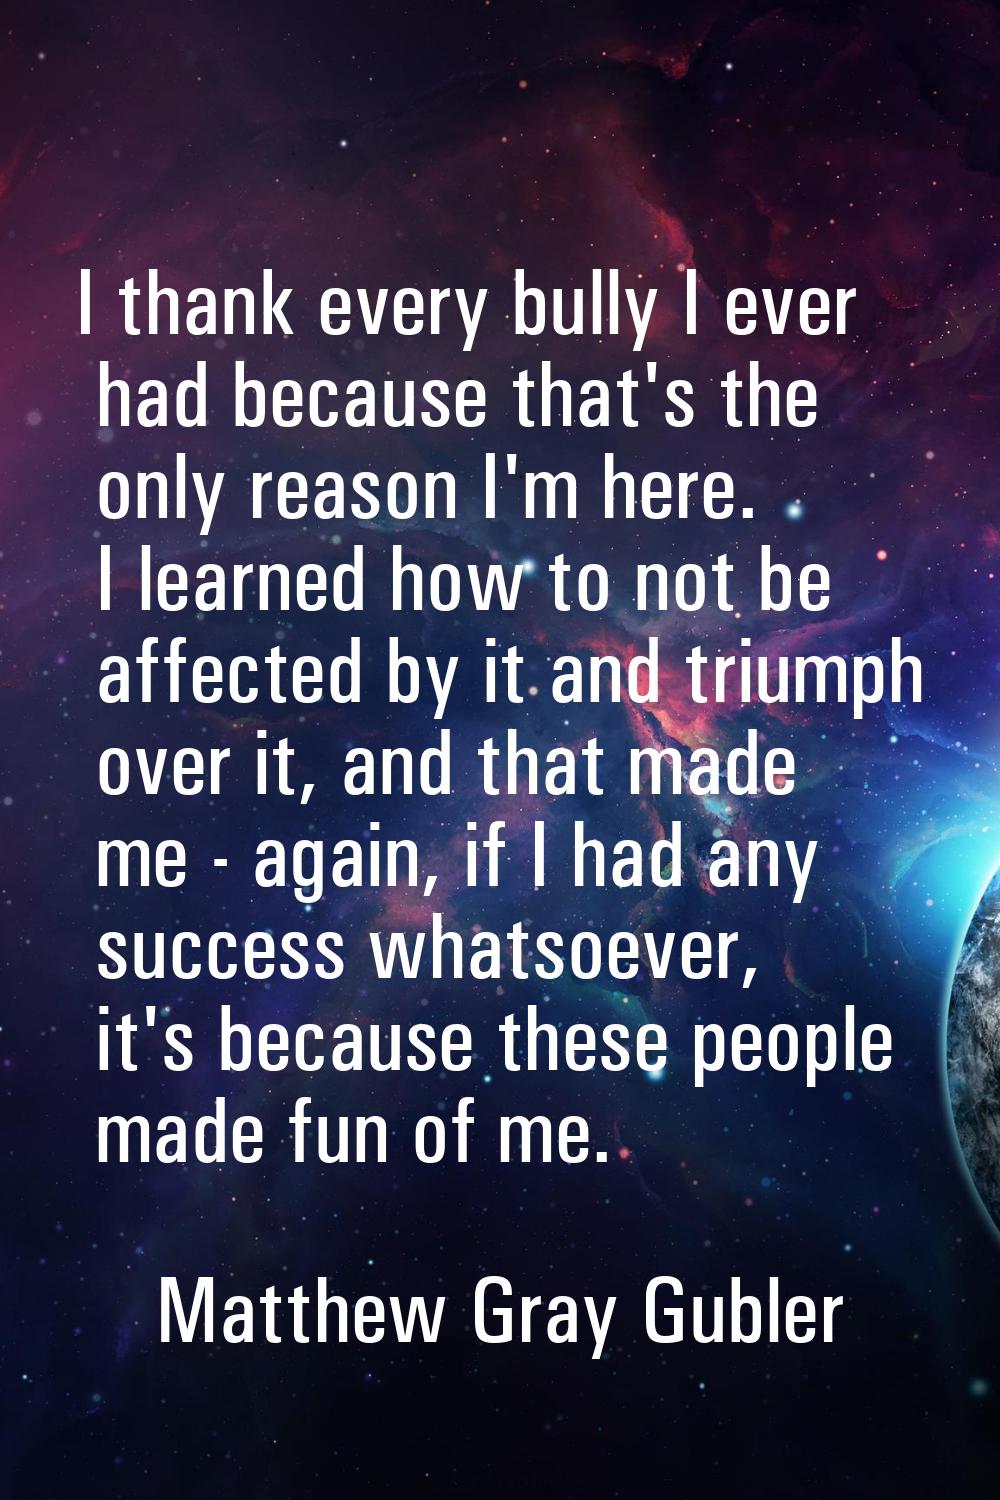 I thank every bully I ever had because that's the only reason I'm here. I learned how to not be aff